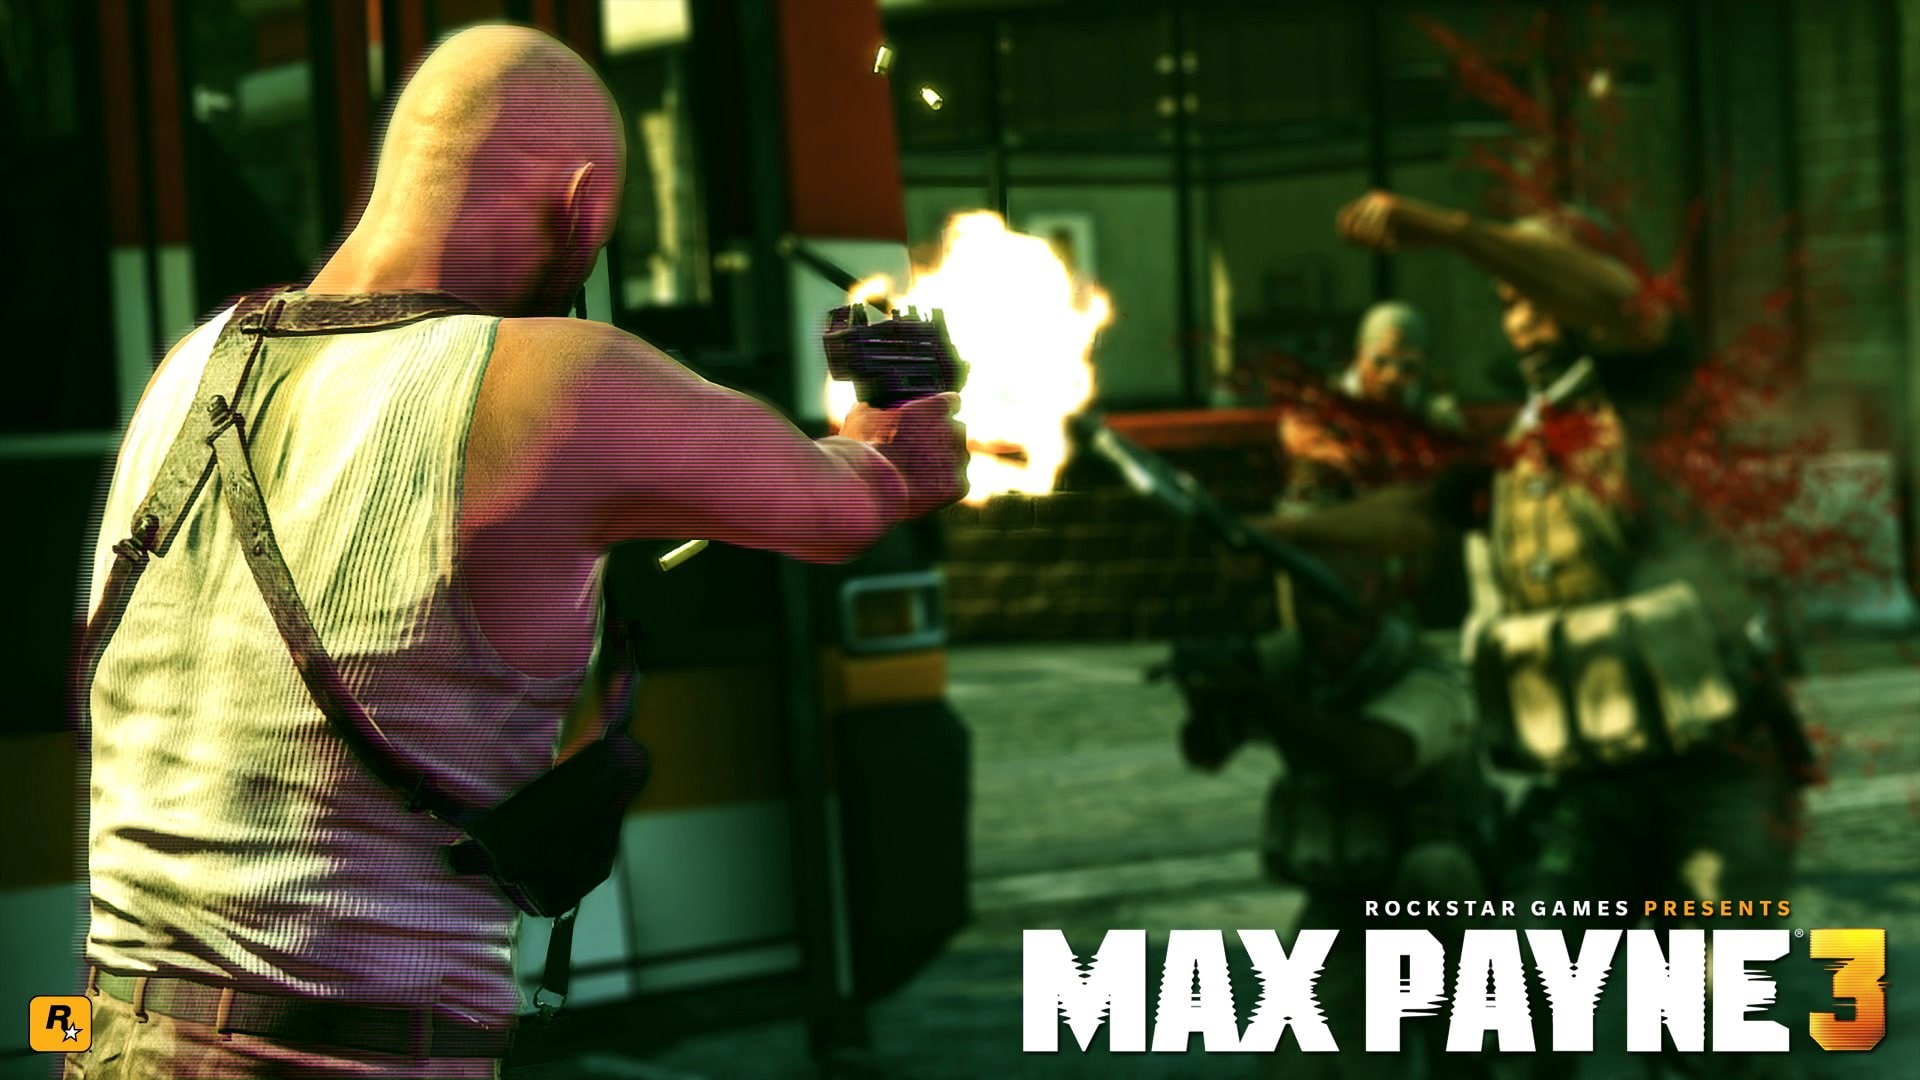 max payne 3, one person, text, real people, focus on foreground